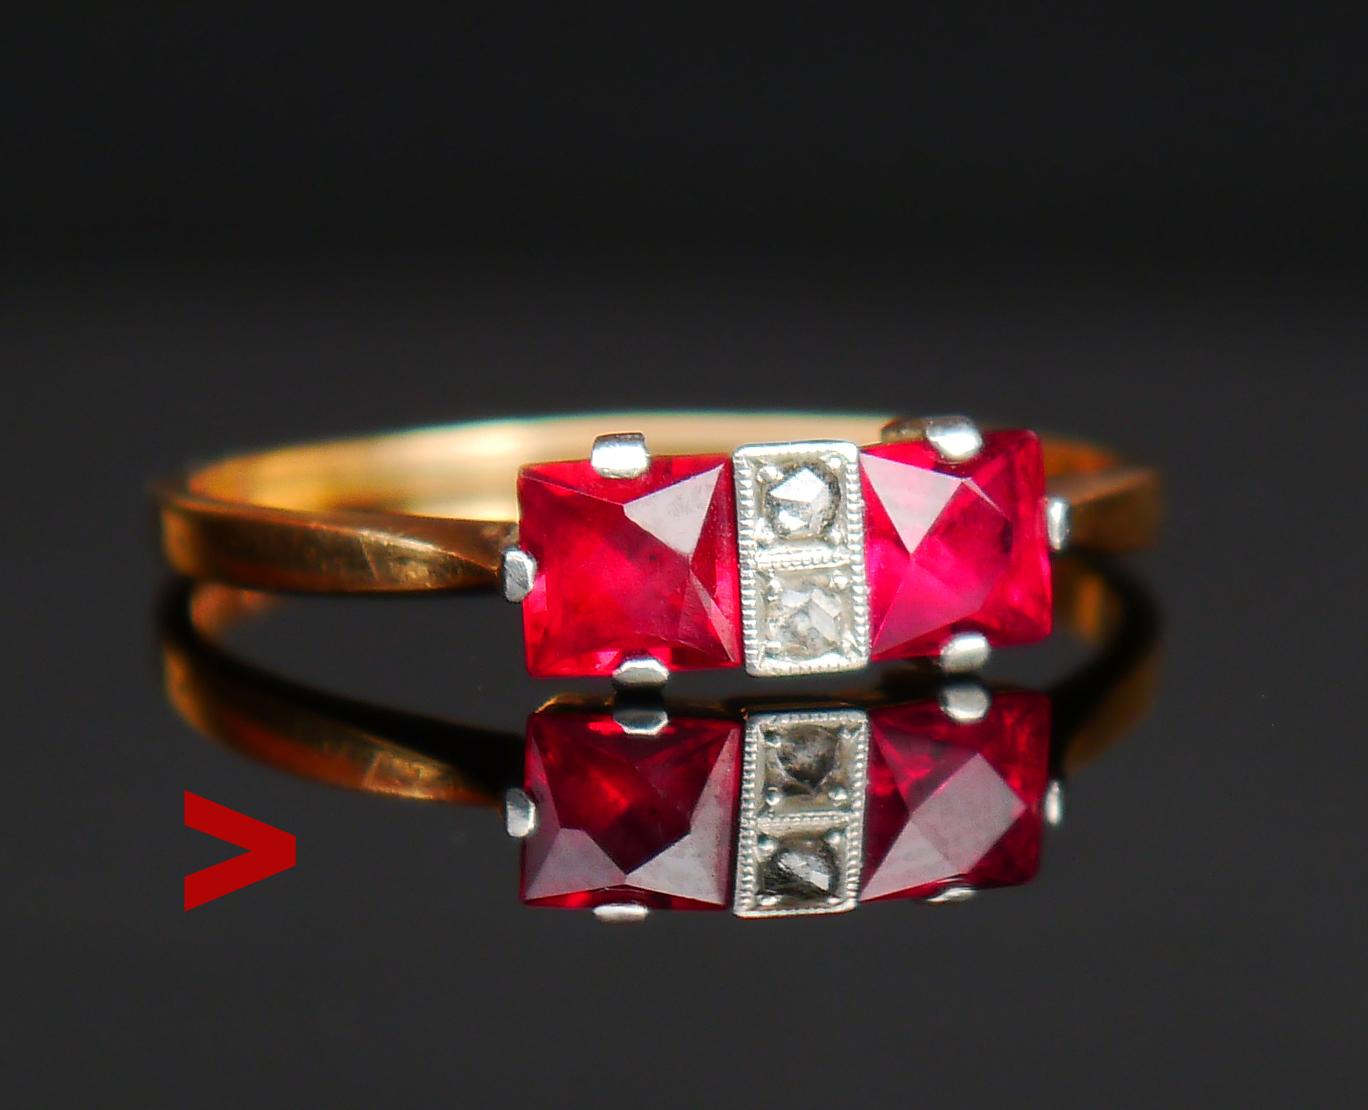 Beautiful four-stones Ring in Art- Deco Style. Band in solid 18ct Yellow Gold with clusters in Platinum featuring two Red Rubies (likely lab-made) cut princess 5 x 5 mm / ca. 0. 7 ct each and two rose cut diamonds Ø 1.75 mm / 0.02 ct each. All